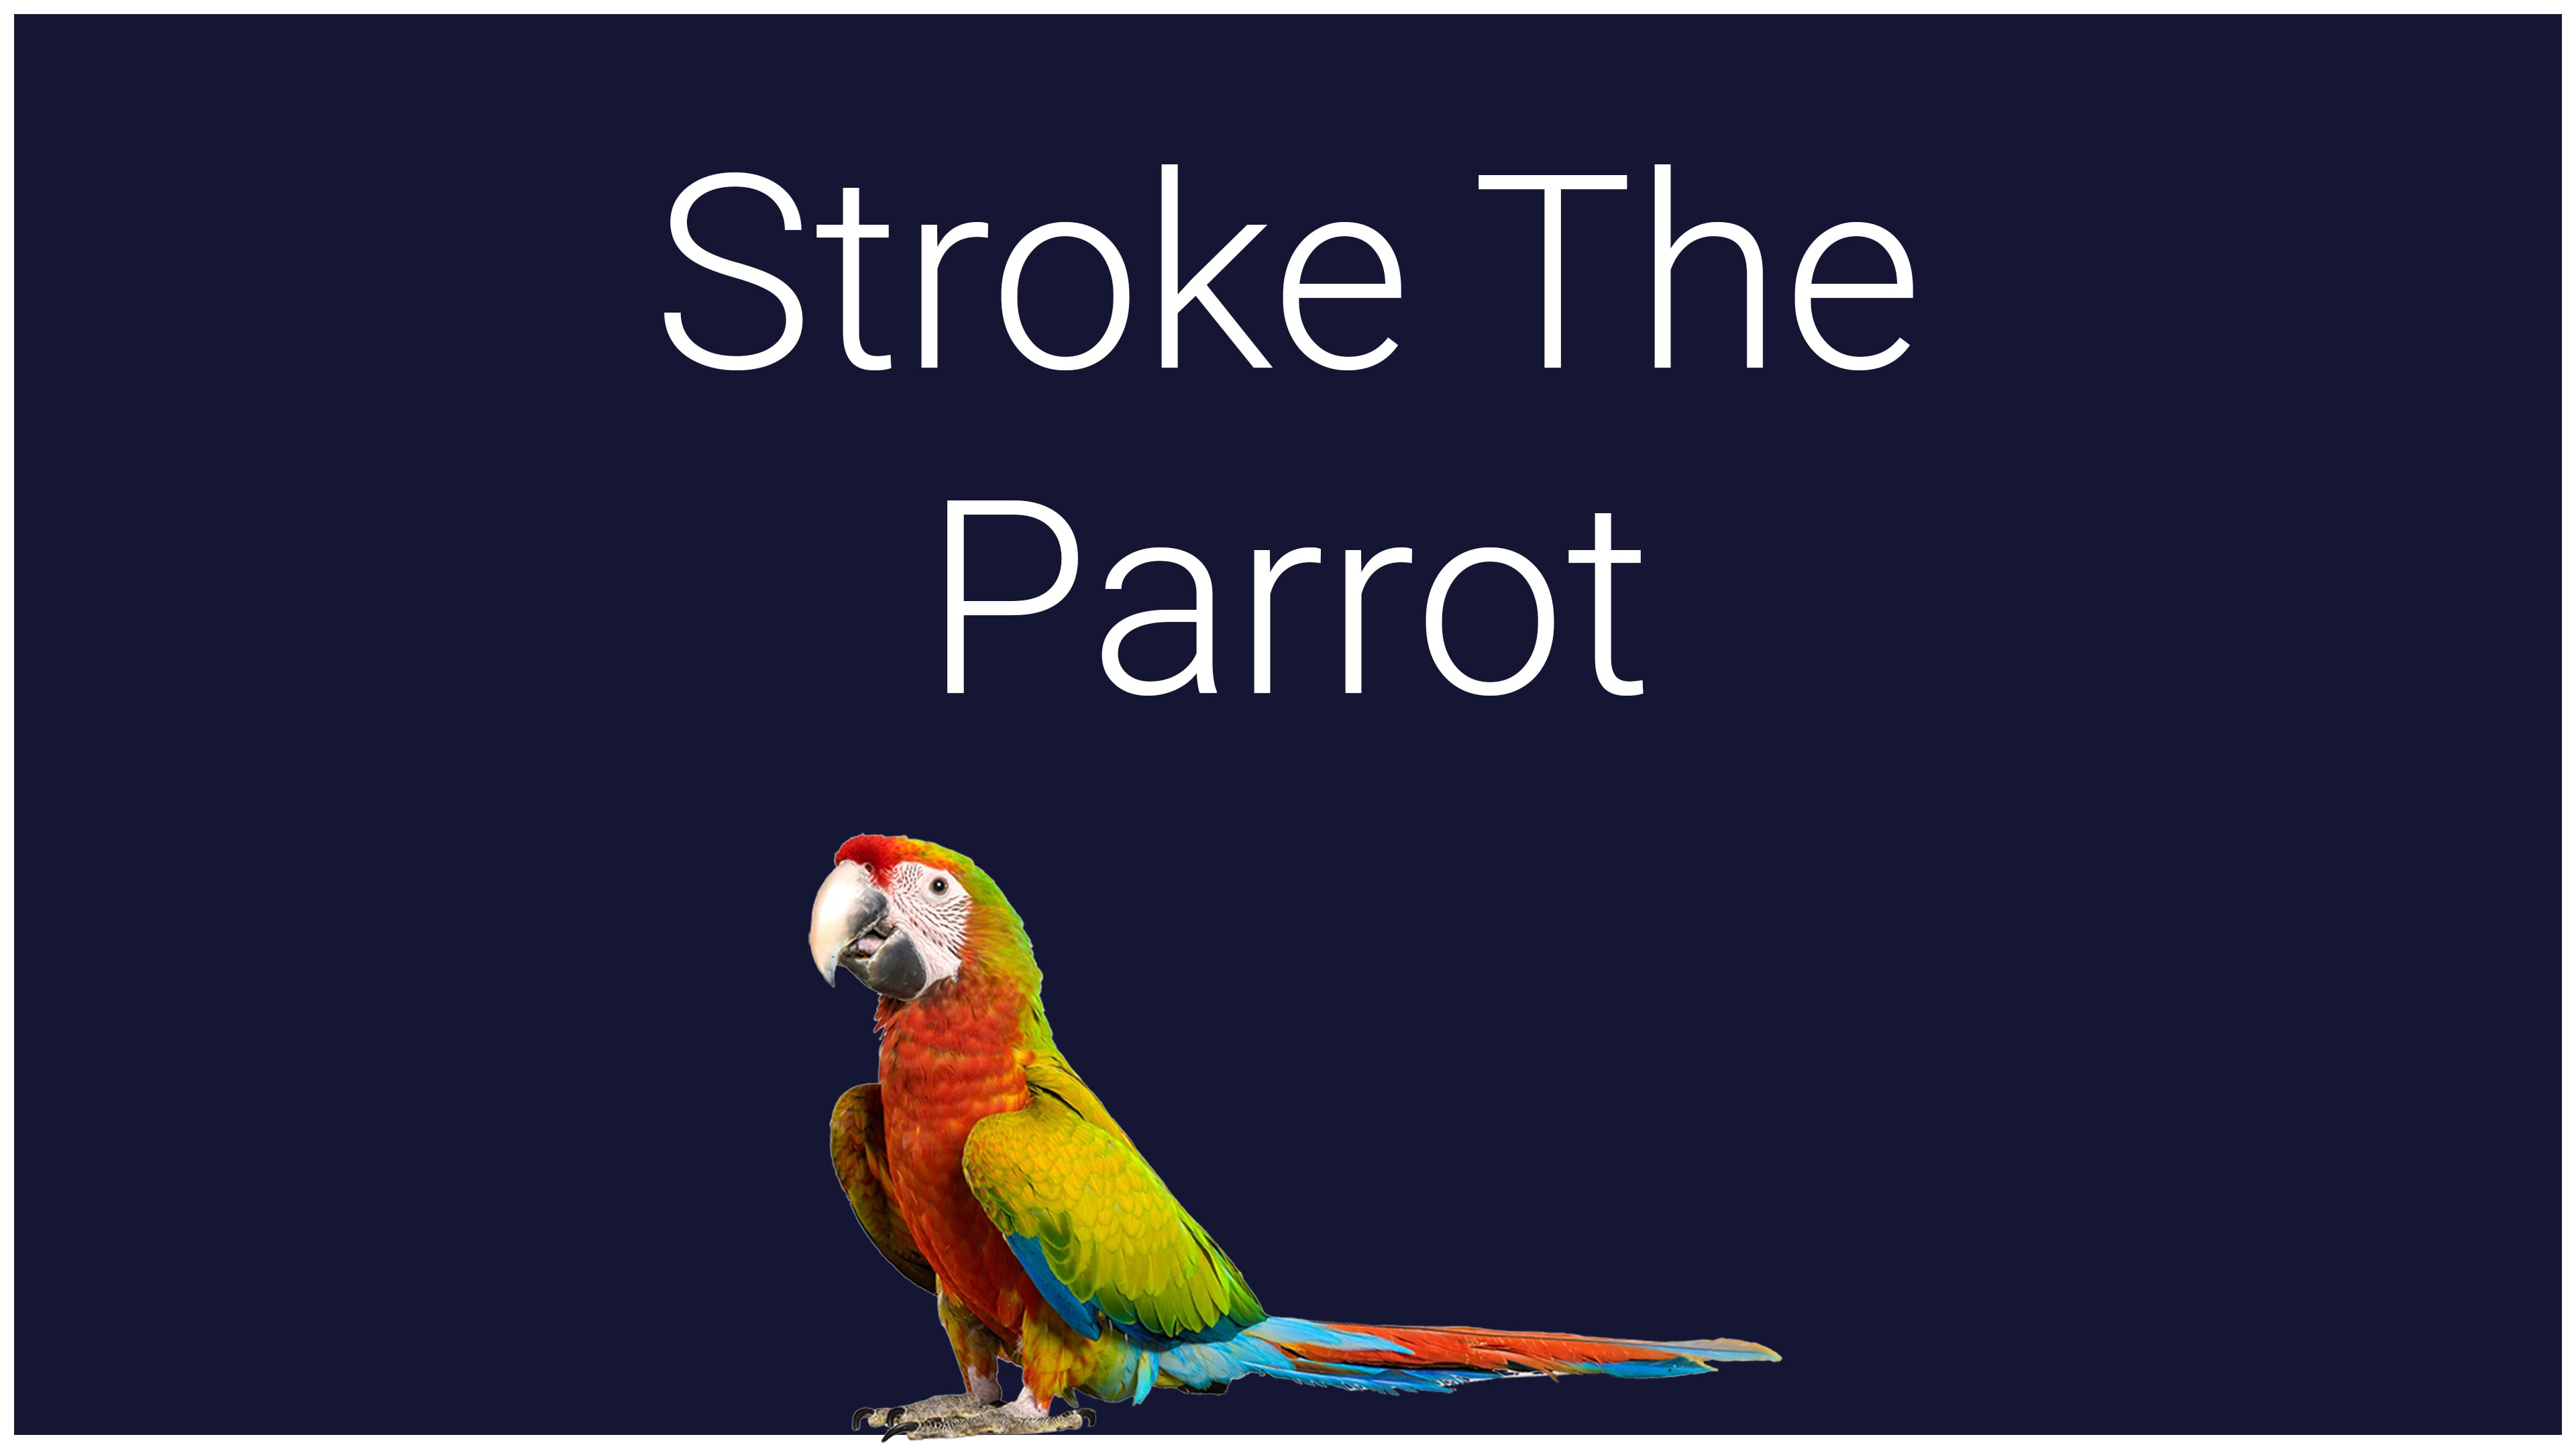 Stroke The Parrot (English)